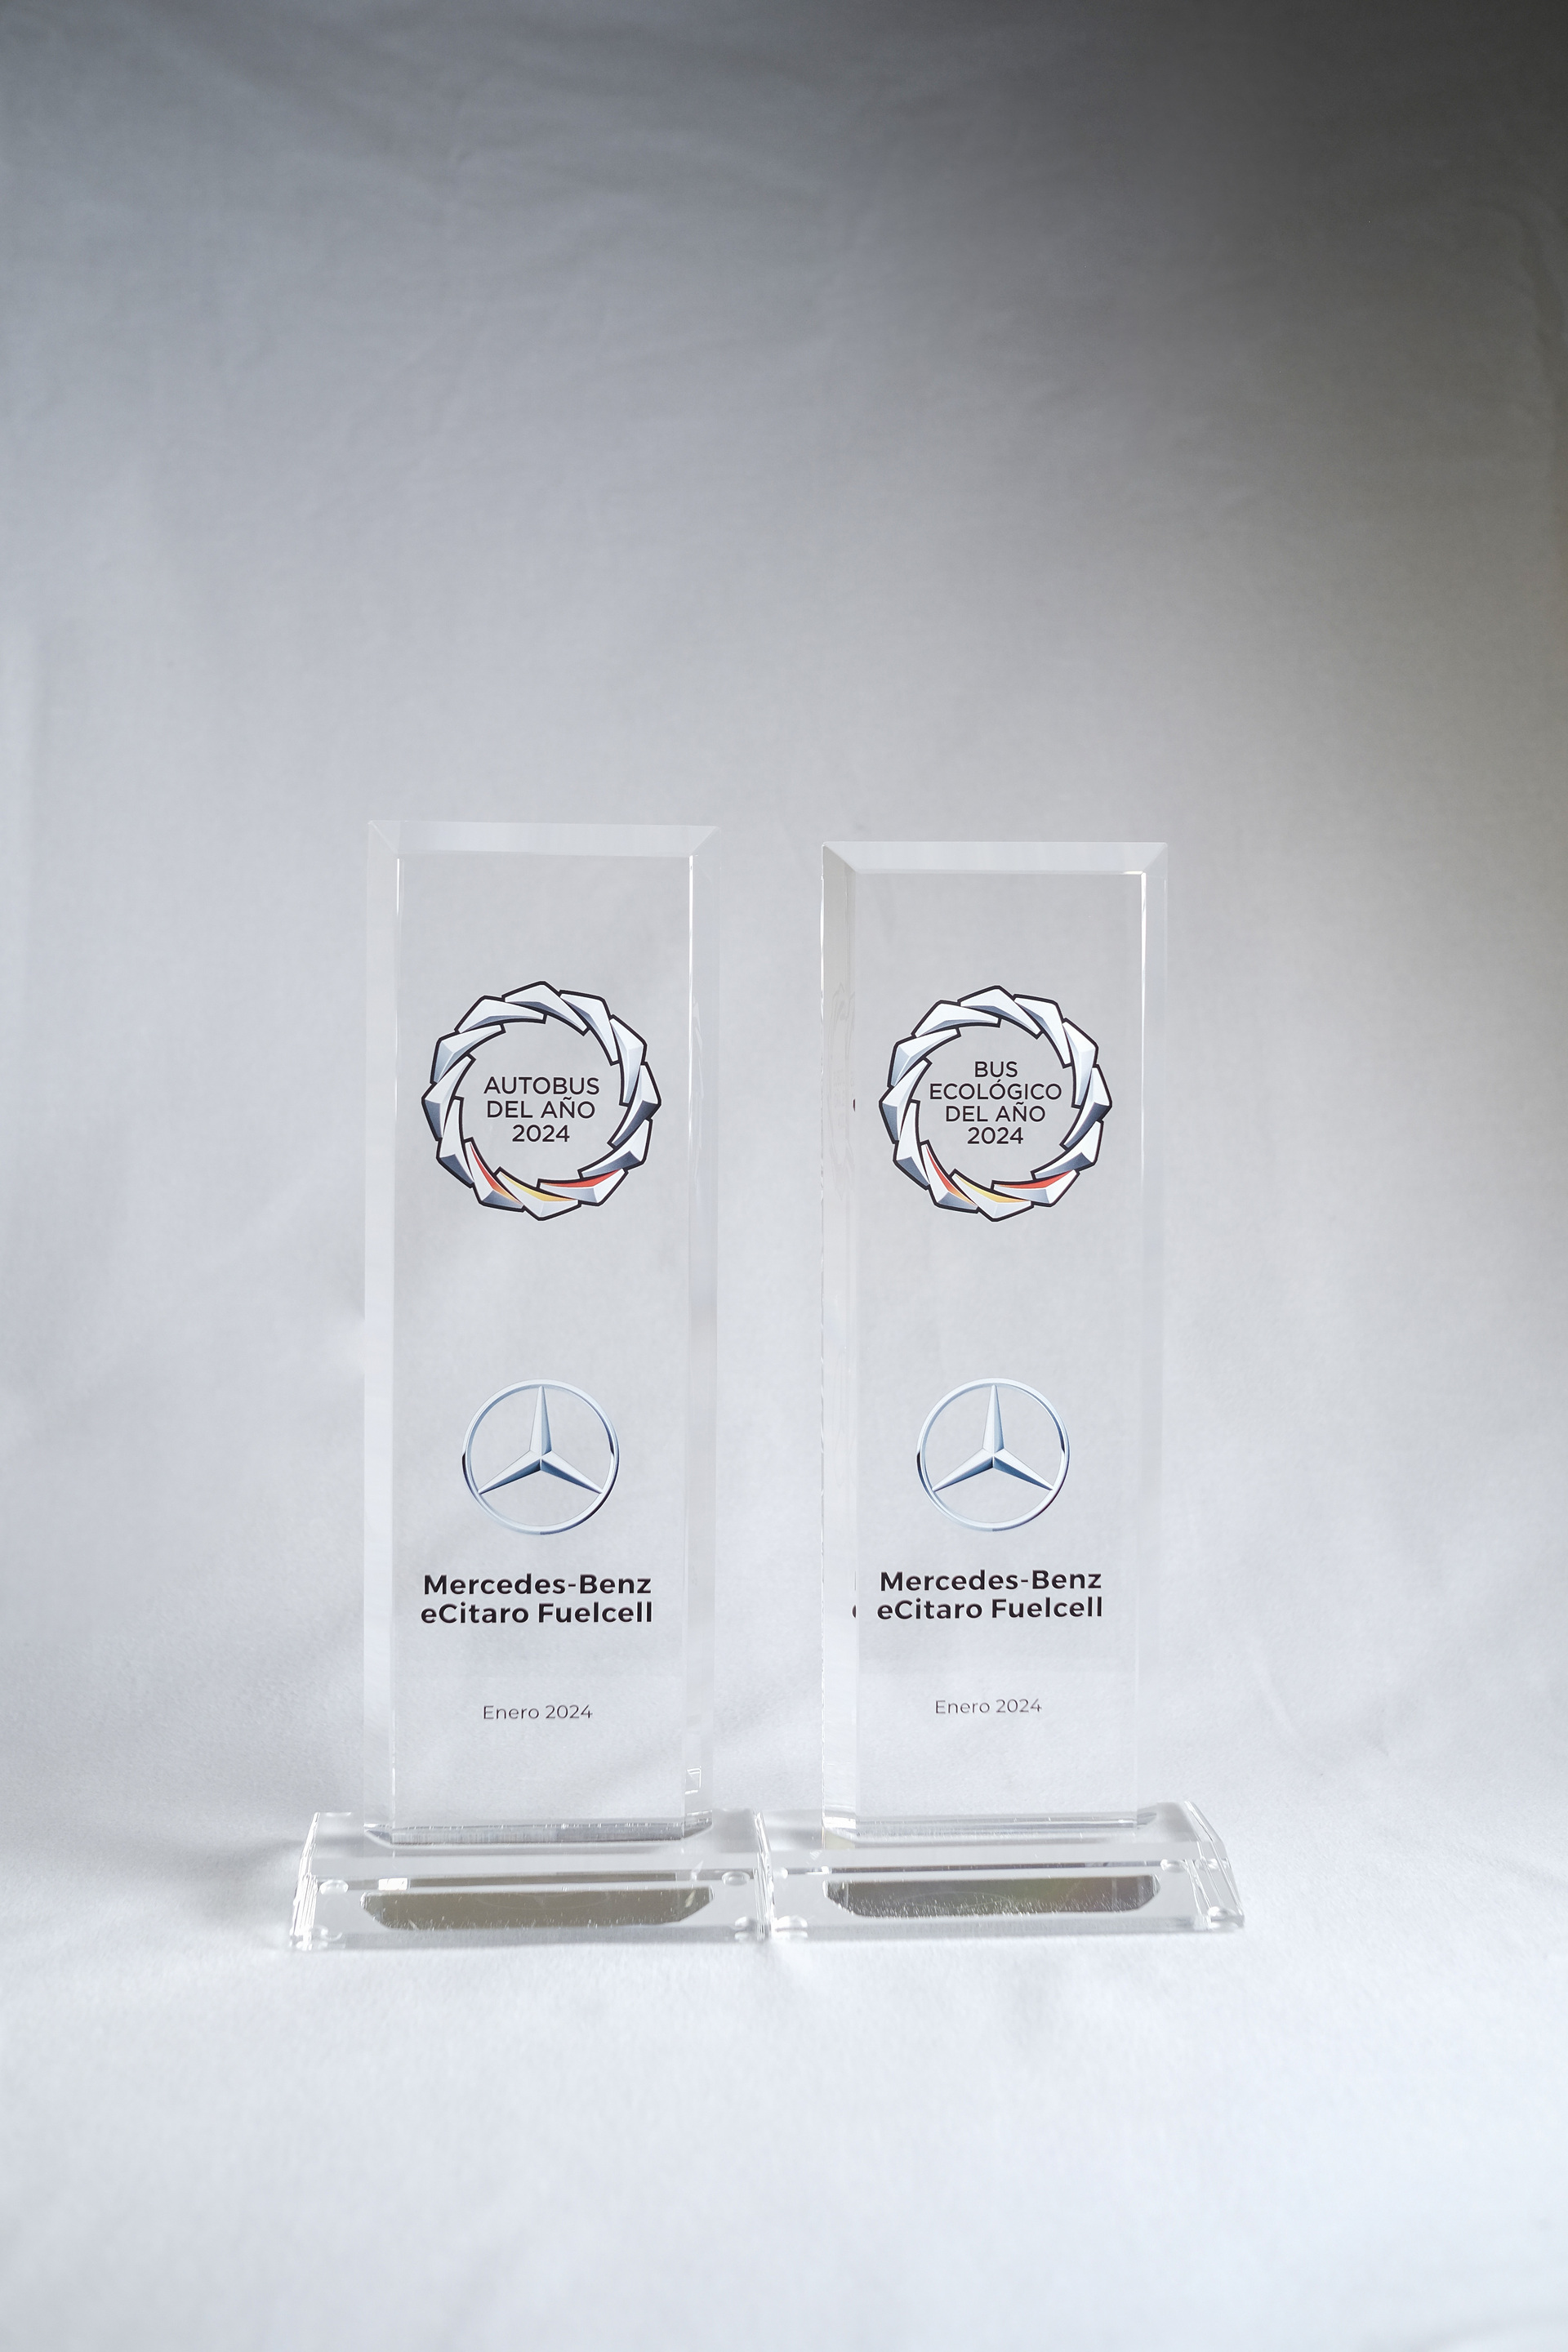 Mercedes-Benz eCitaro fuel cell is "Bus of the Year" and "Ecological Bus of the Year"